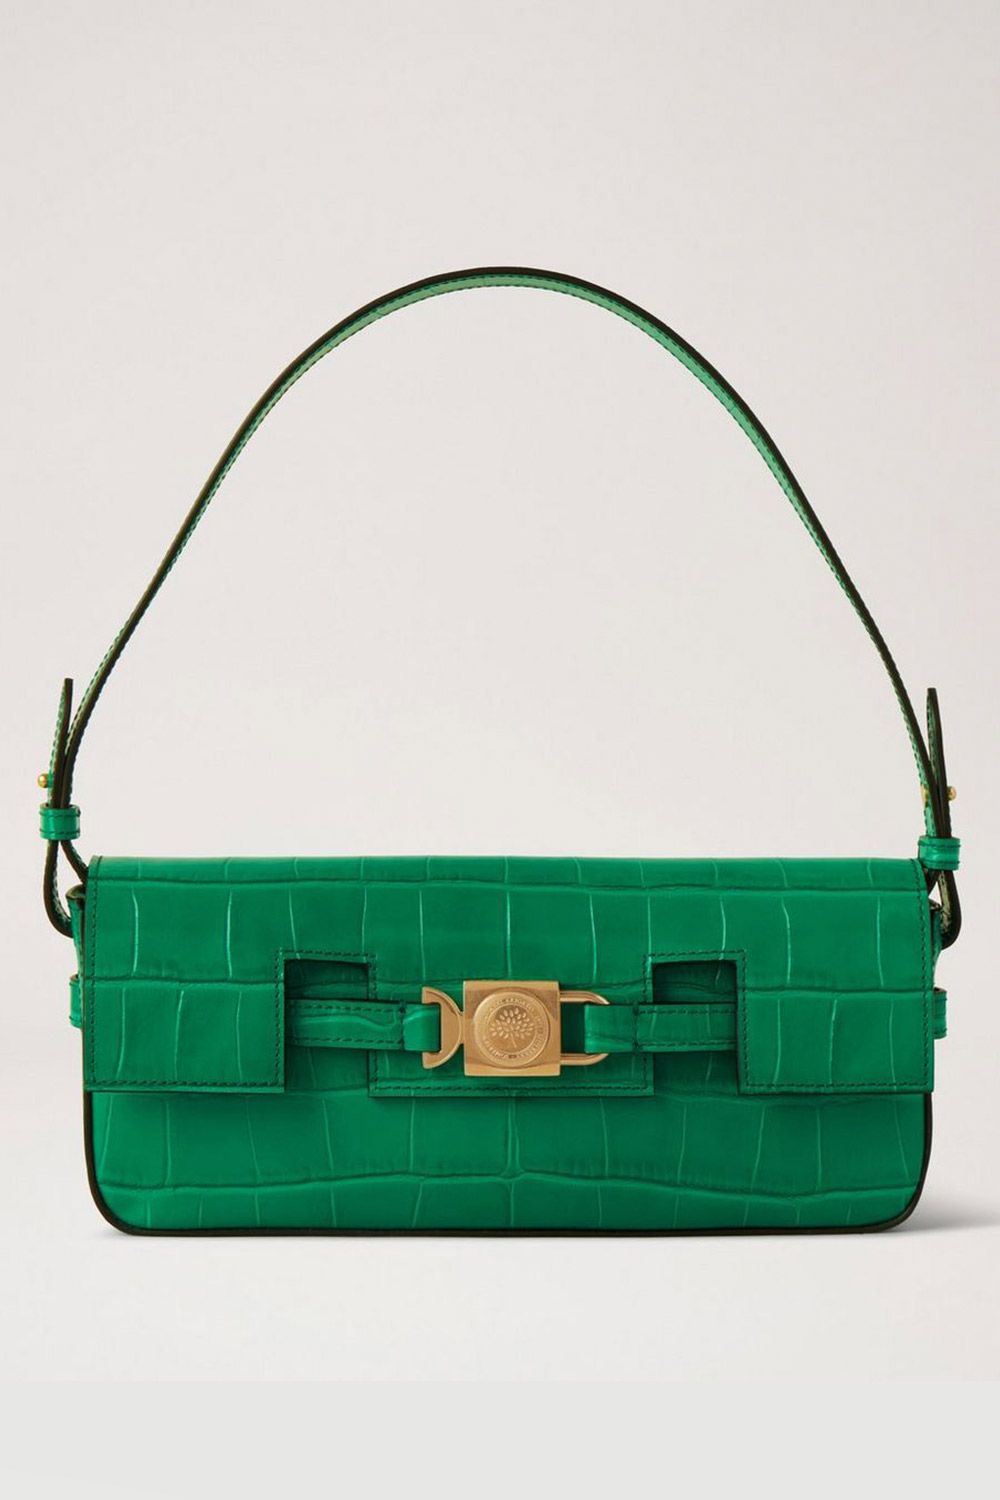 The must-have pieces from the Mulberry x Axel Arigato collaboration ...